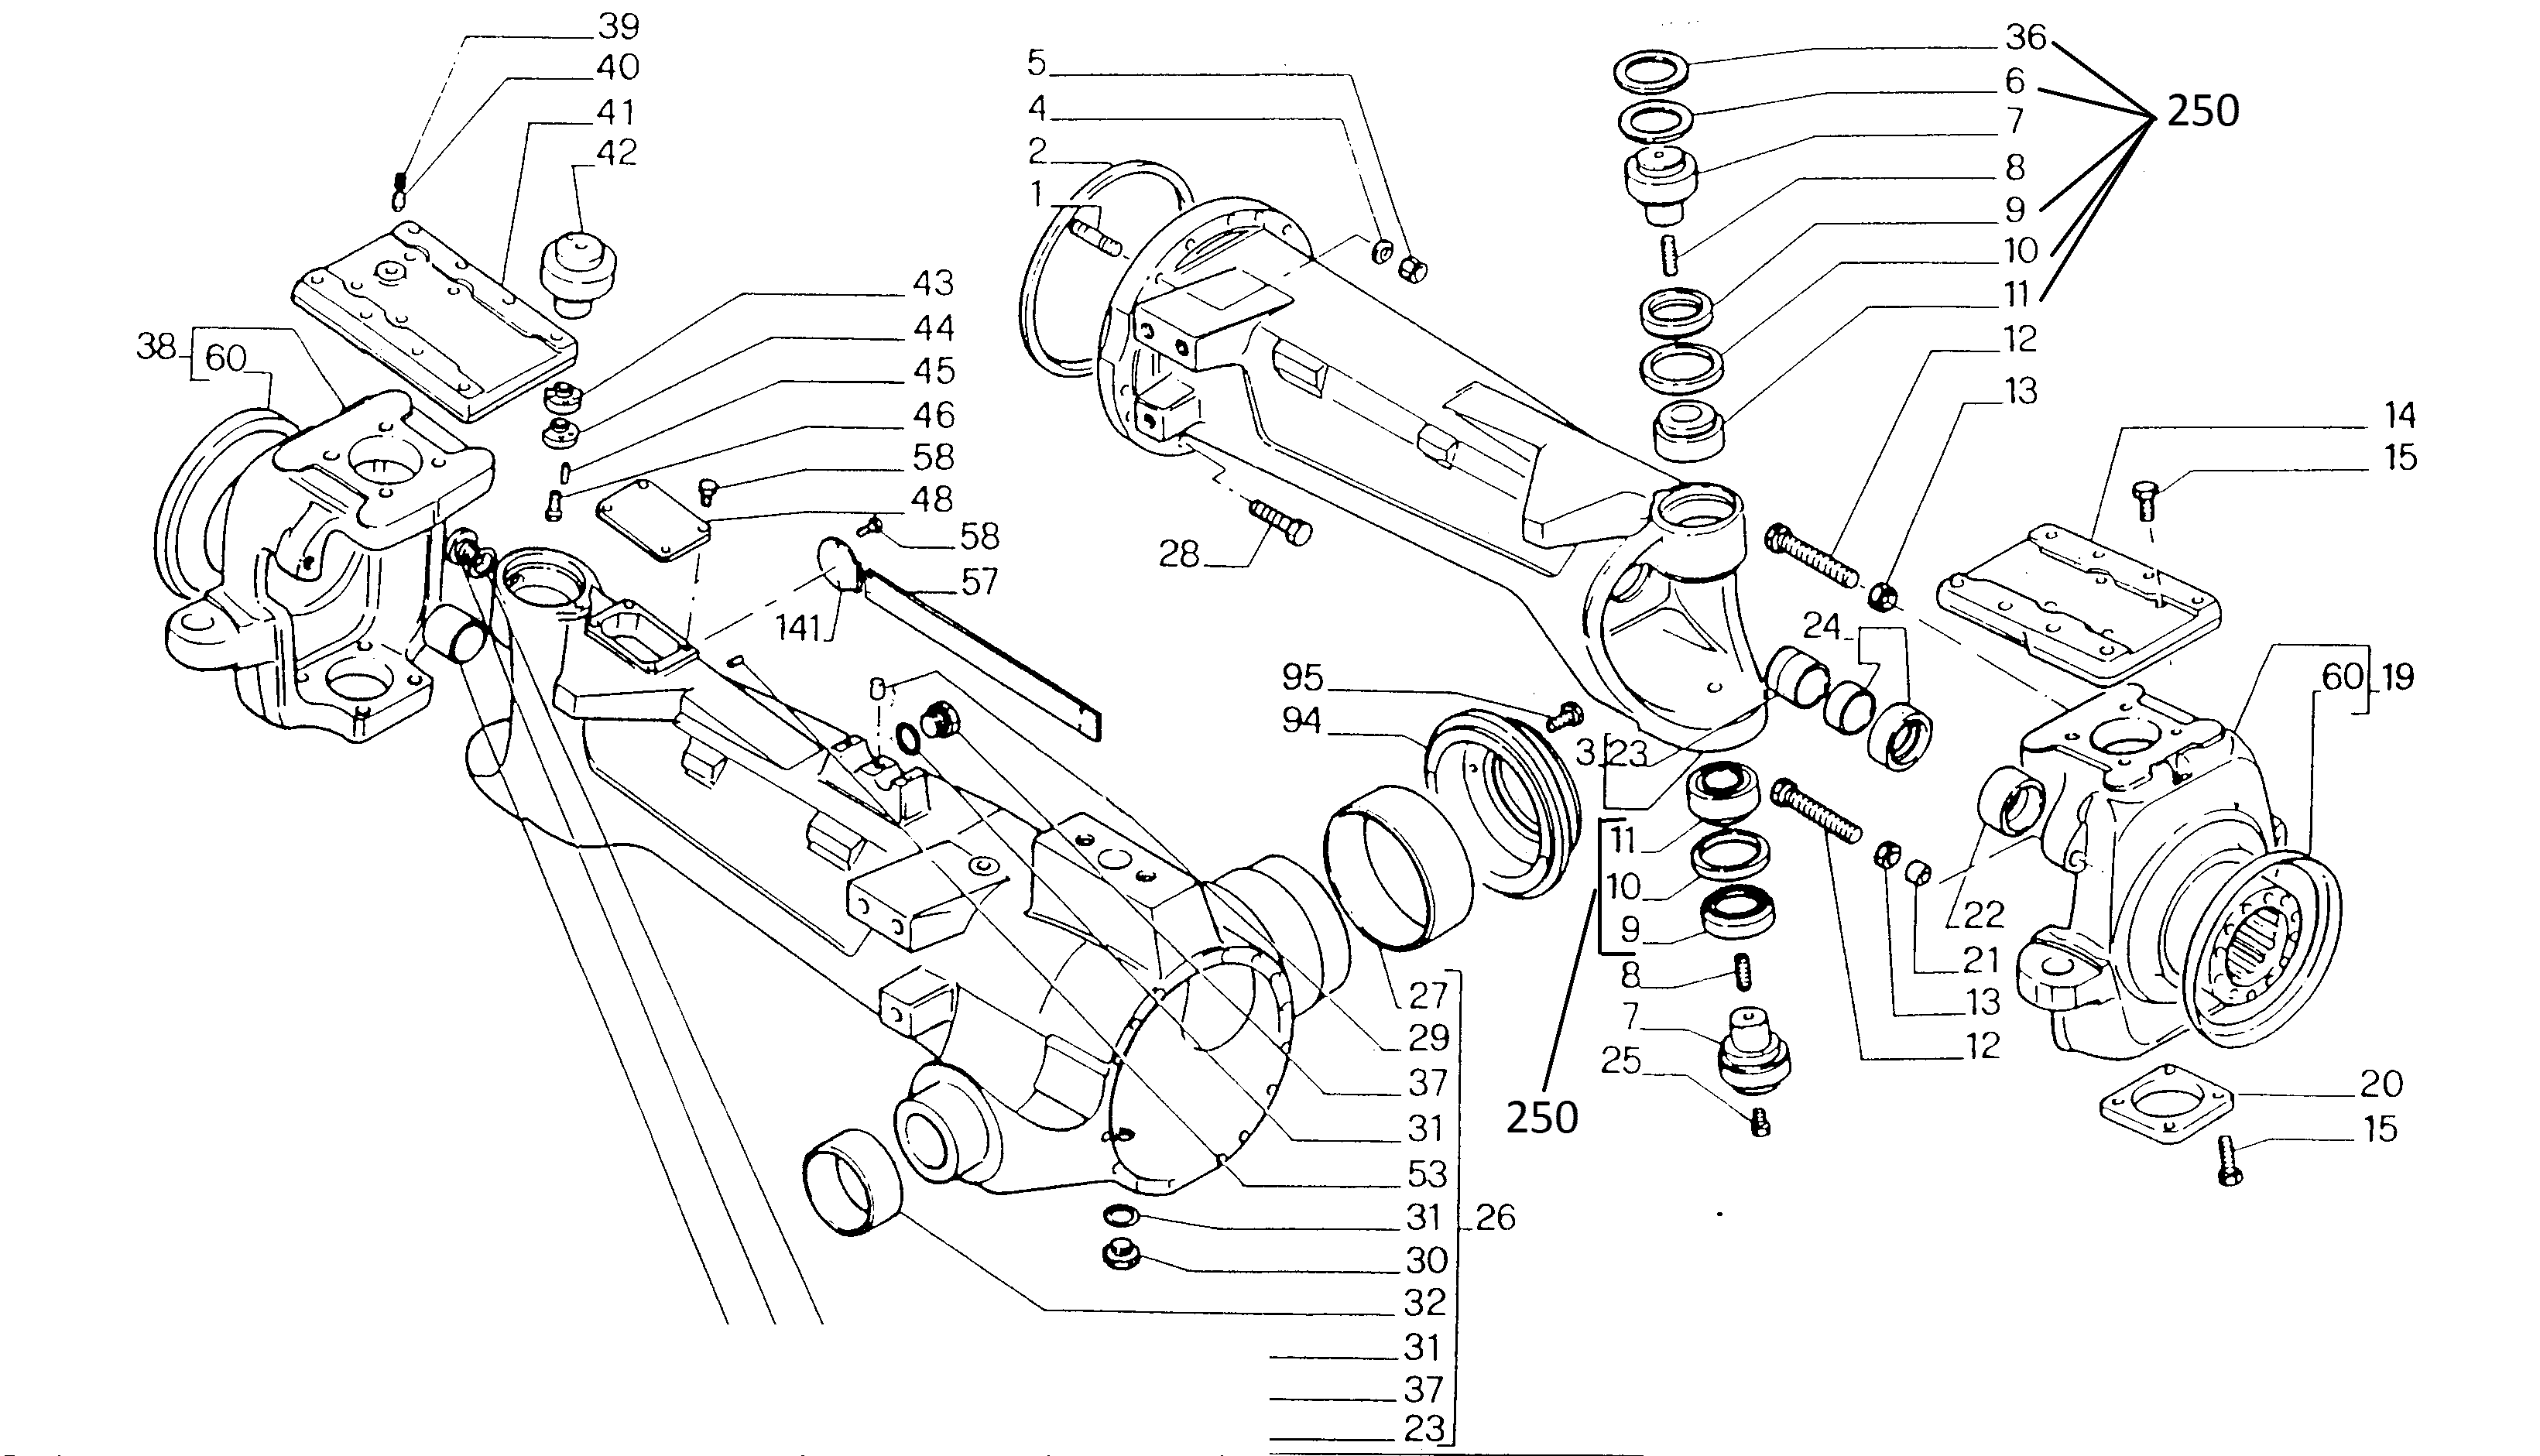 drawing for CNH NEW HOLLAND 84021783 - COVER (figure 5)